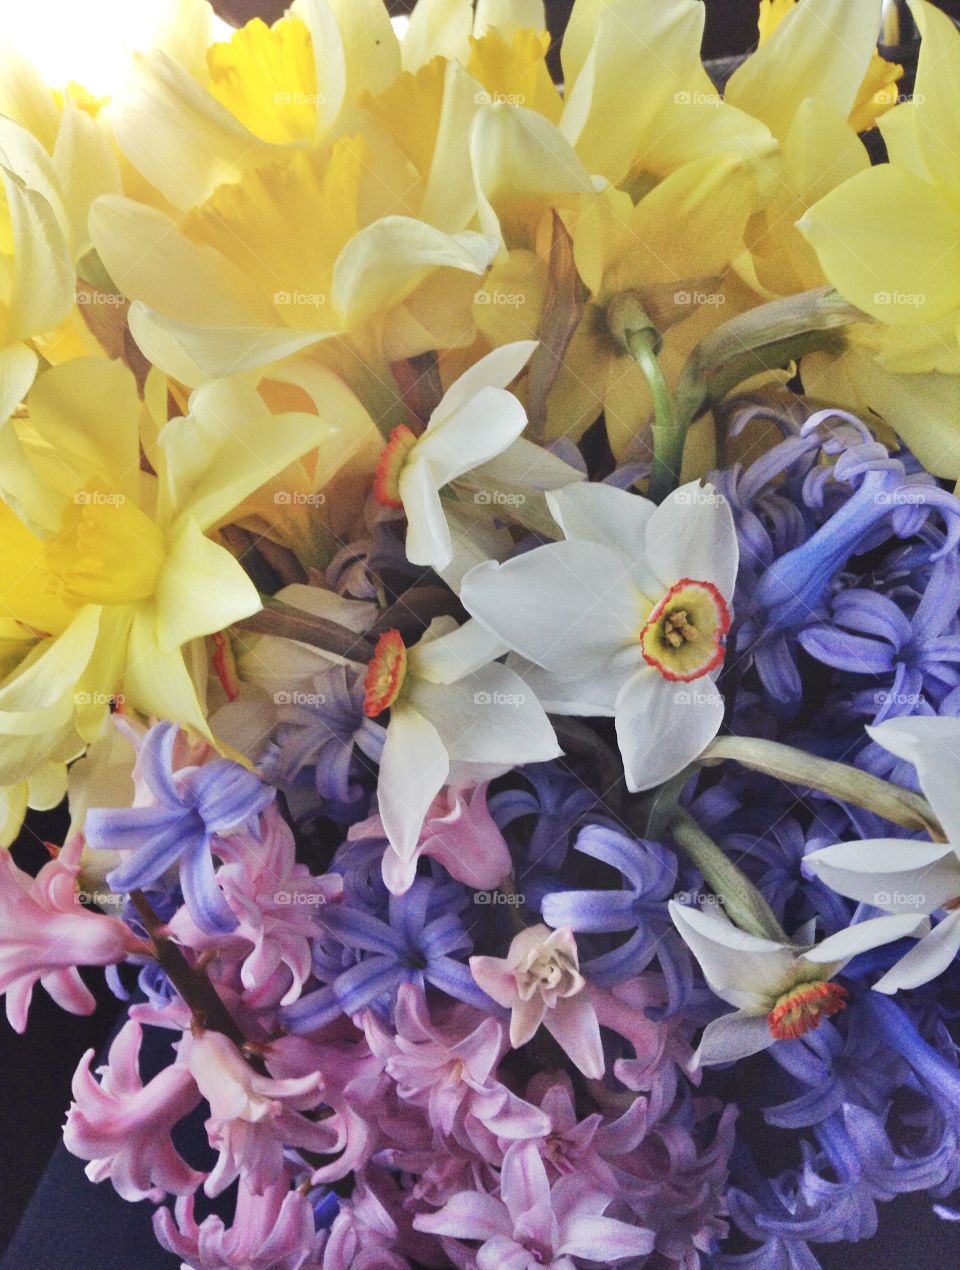 Bouquet of spring flowers - daffodils, narcissus and hyacinth